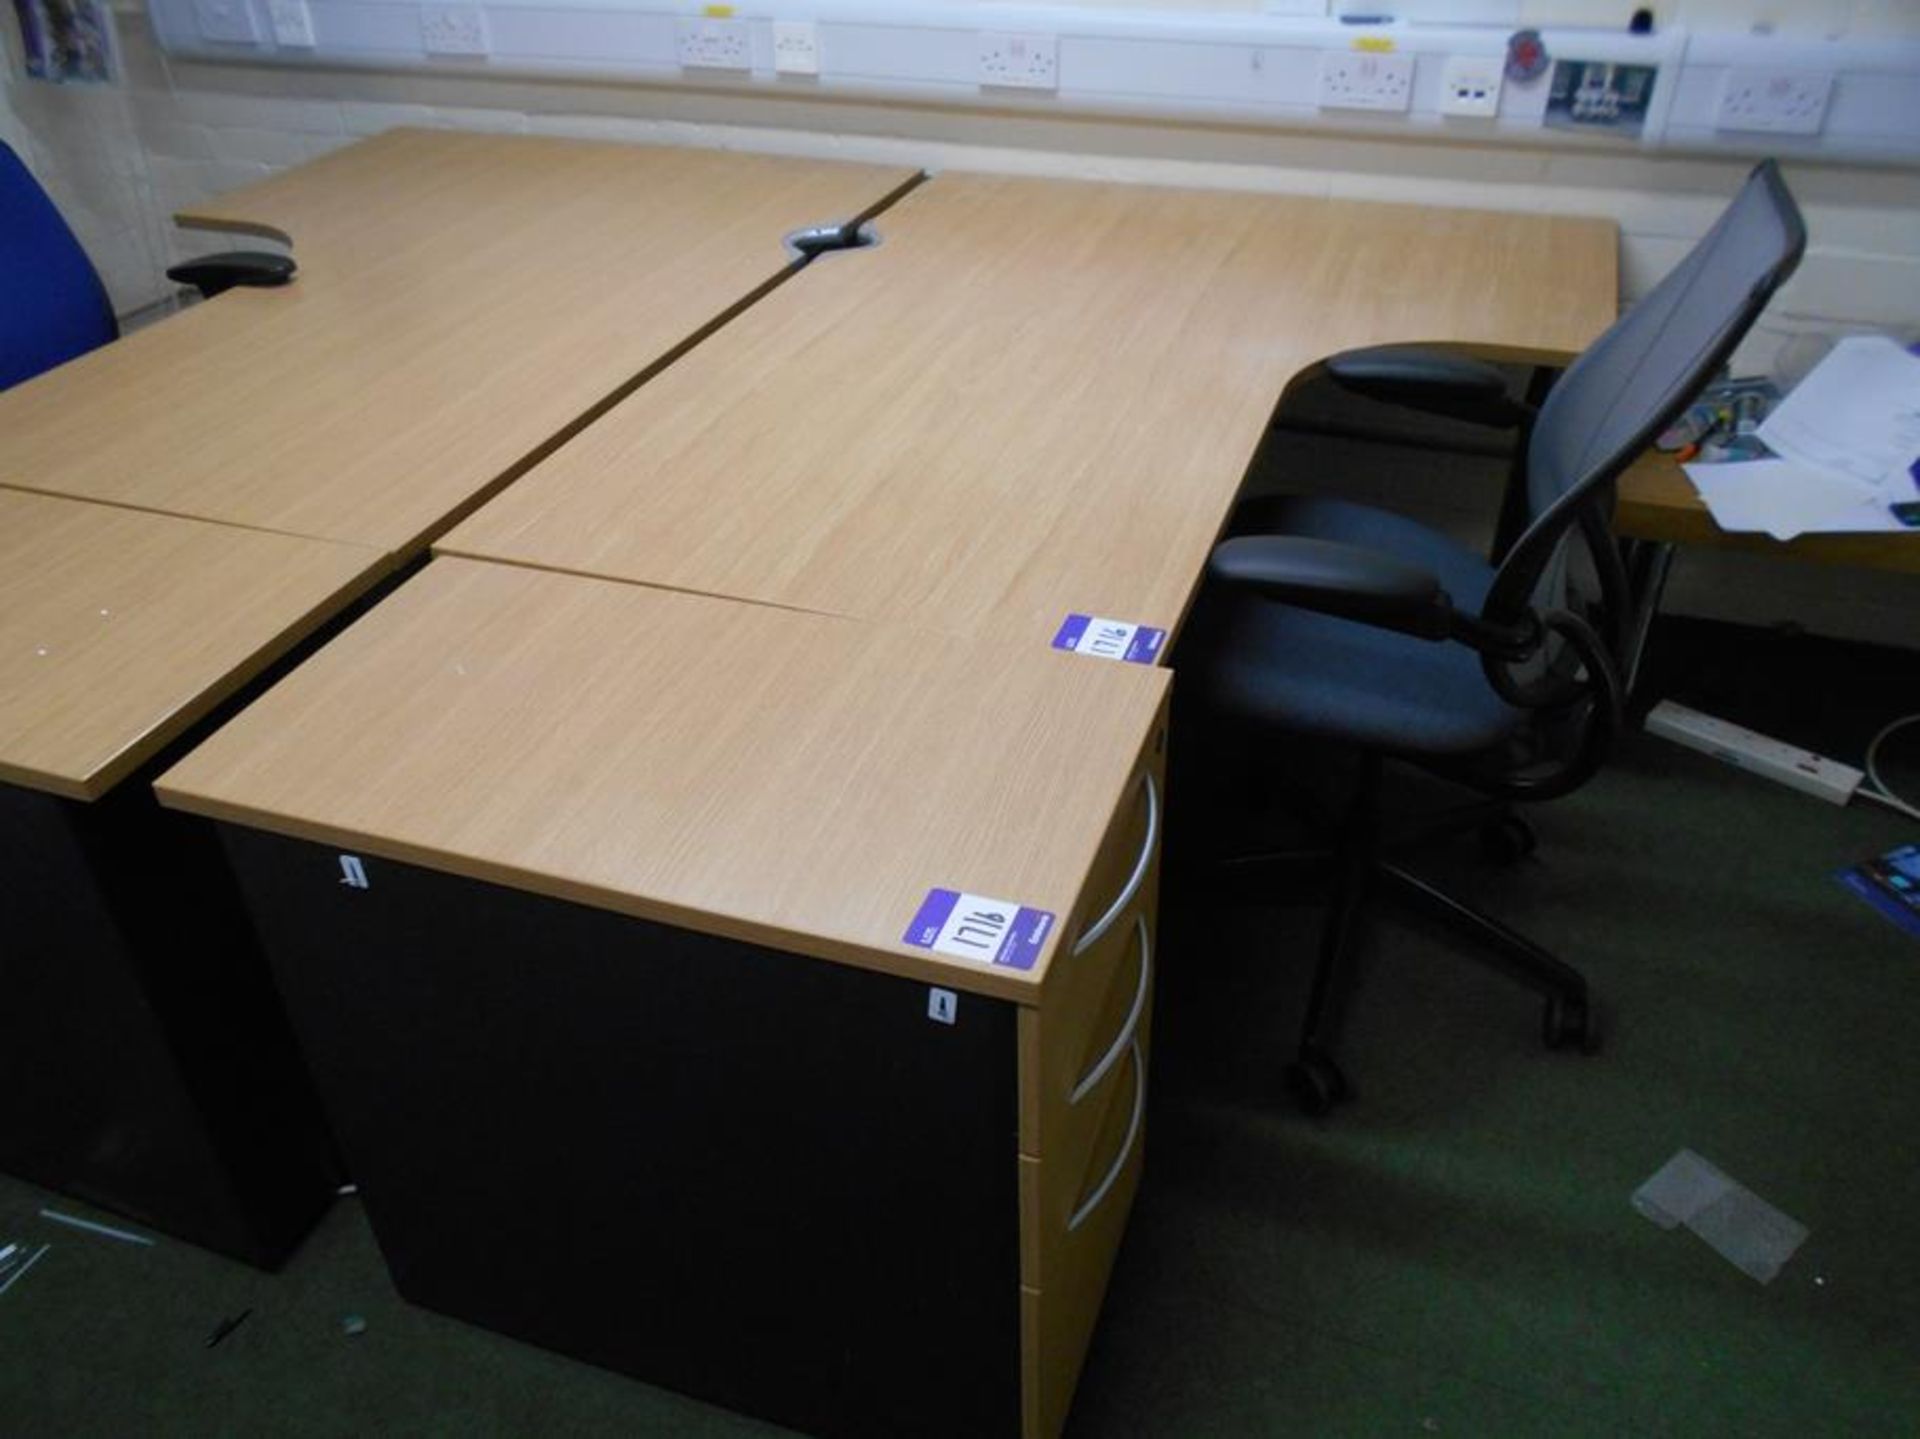 * 2 Oak Effect L/H and R/H Radius 1600 x 1000 Desks with 2 Desk High 3 Drawer Pedestals and 2 Mobile